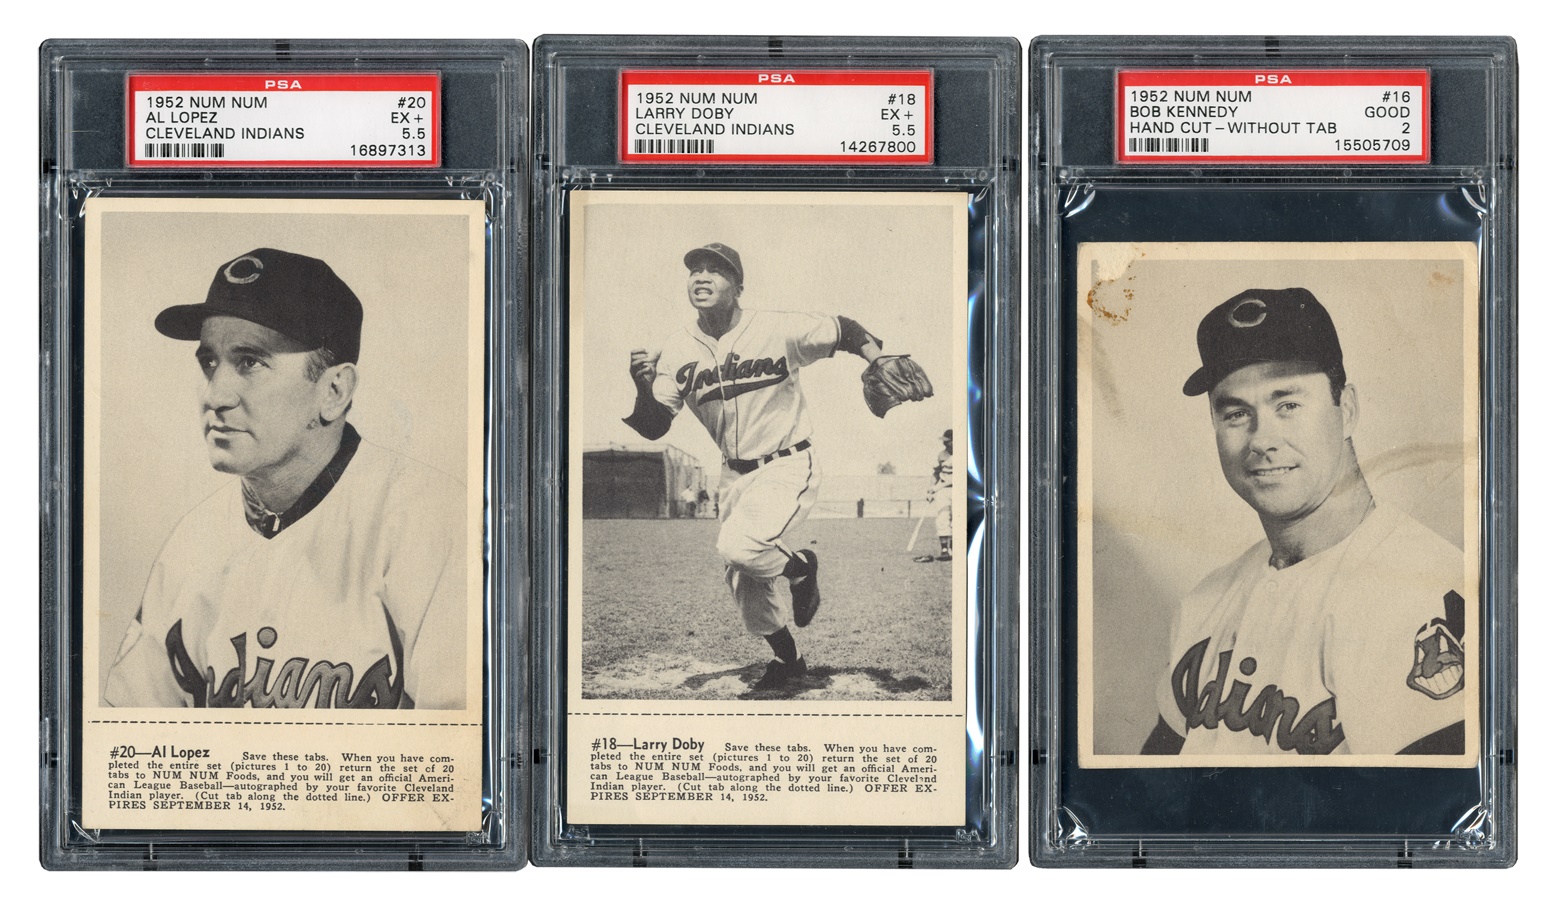 Sports and Non Sports Cards - 1952 Num Num Cleveland Indians Card Set (#5 on the PSA Set Registry)